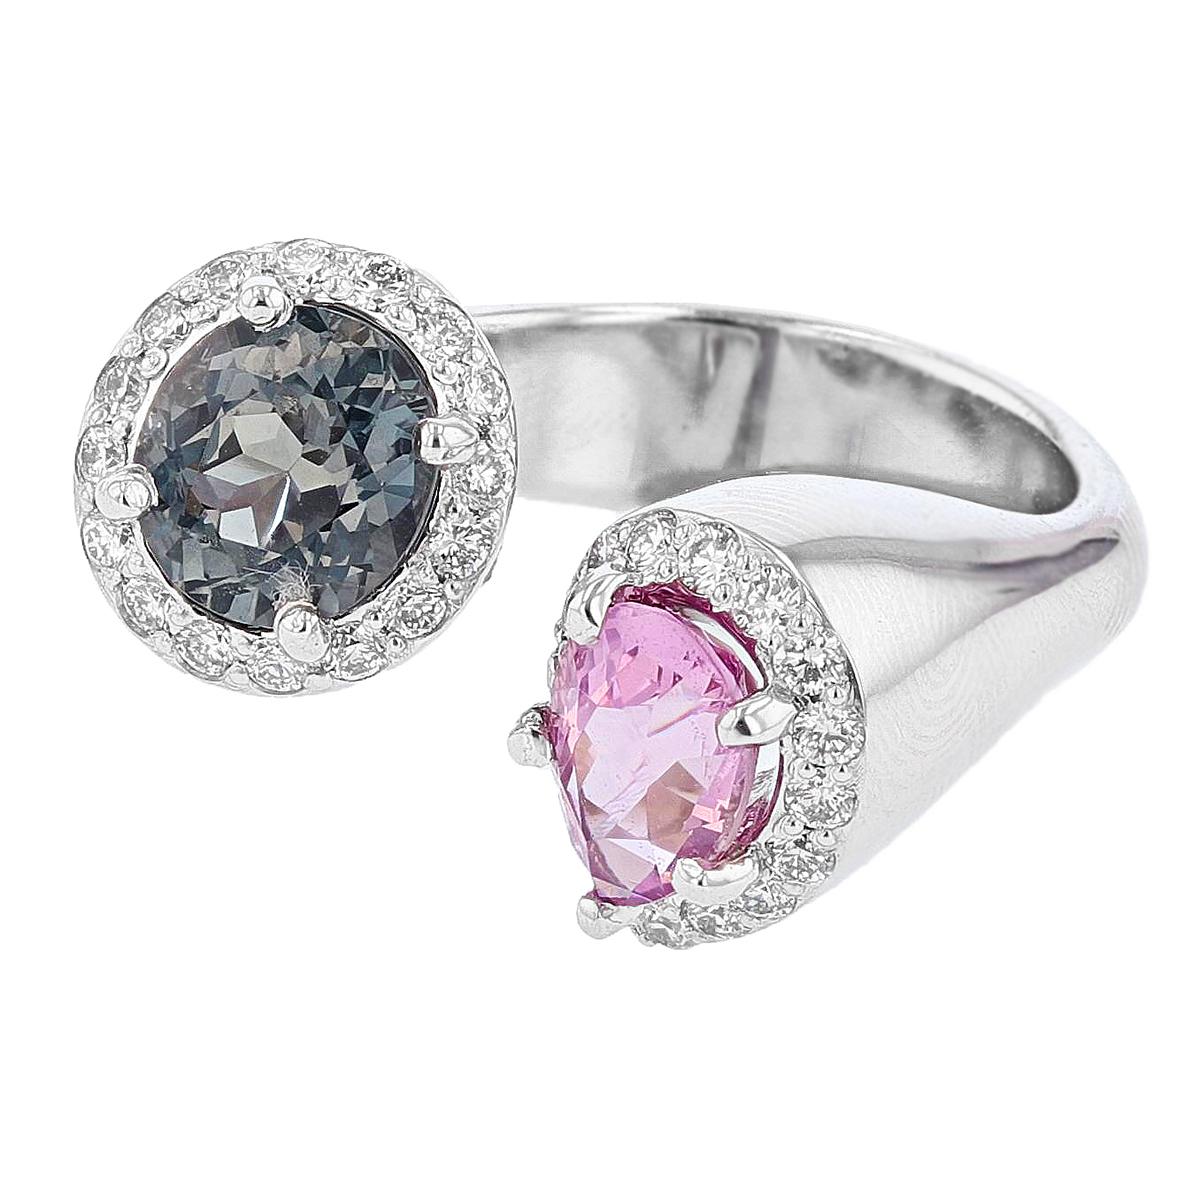 This ring is designed by Nazarelle and made in 14k white gold. The center stones are an oval blue spinel and a pear shape pink spinel weighing 2.91 total carat weight and they are prong set. The mounting features 33 round diamonds weighing 0.51ct.